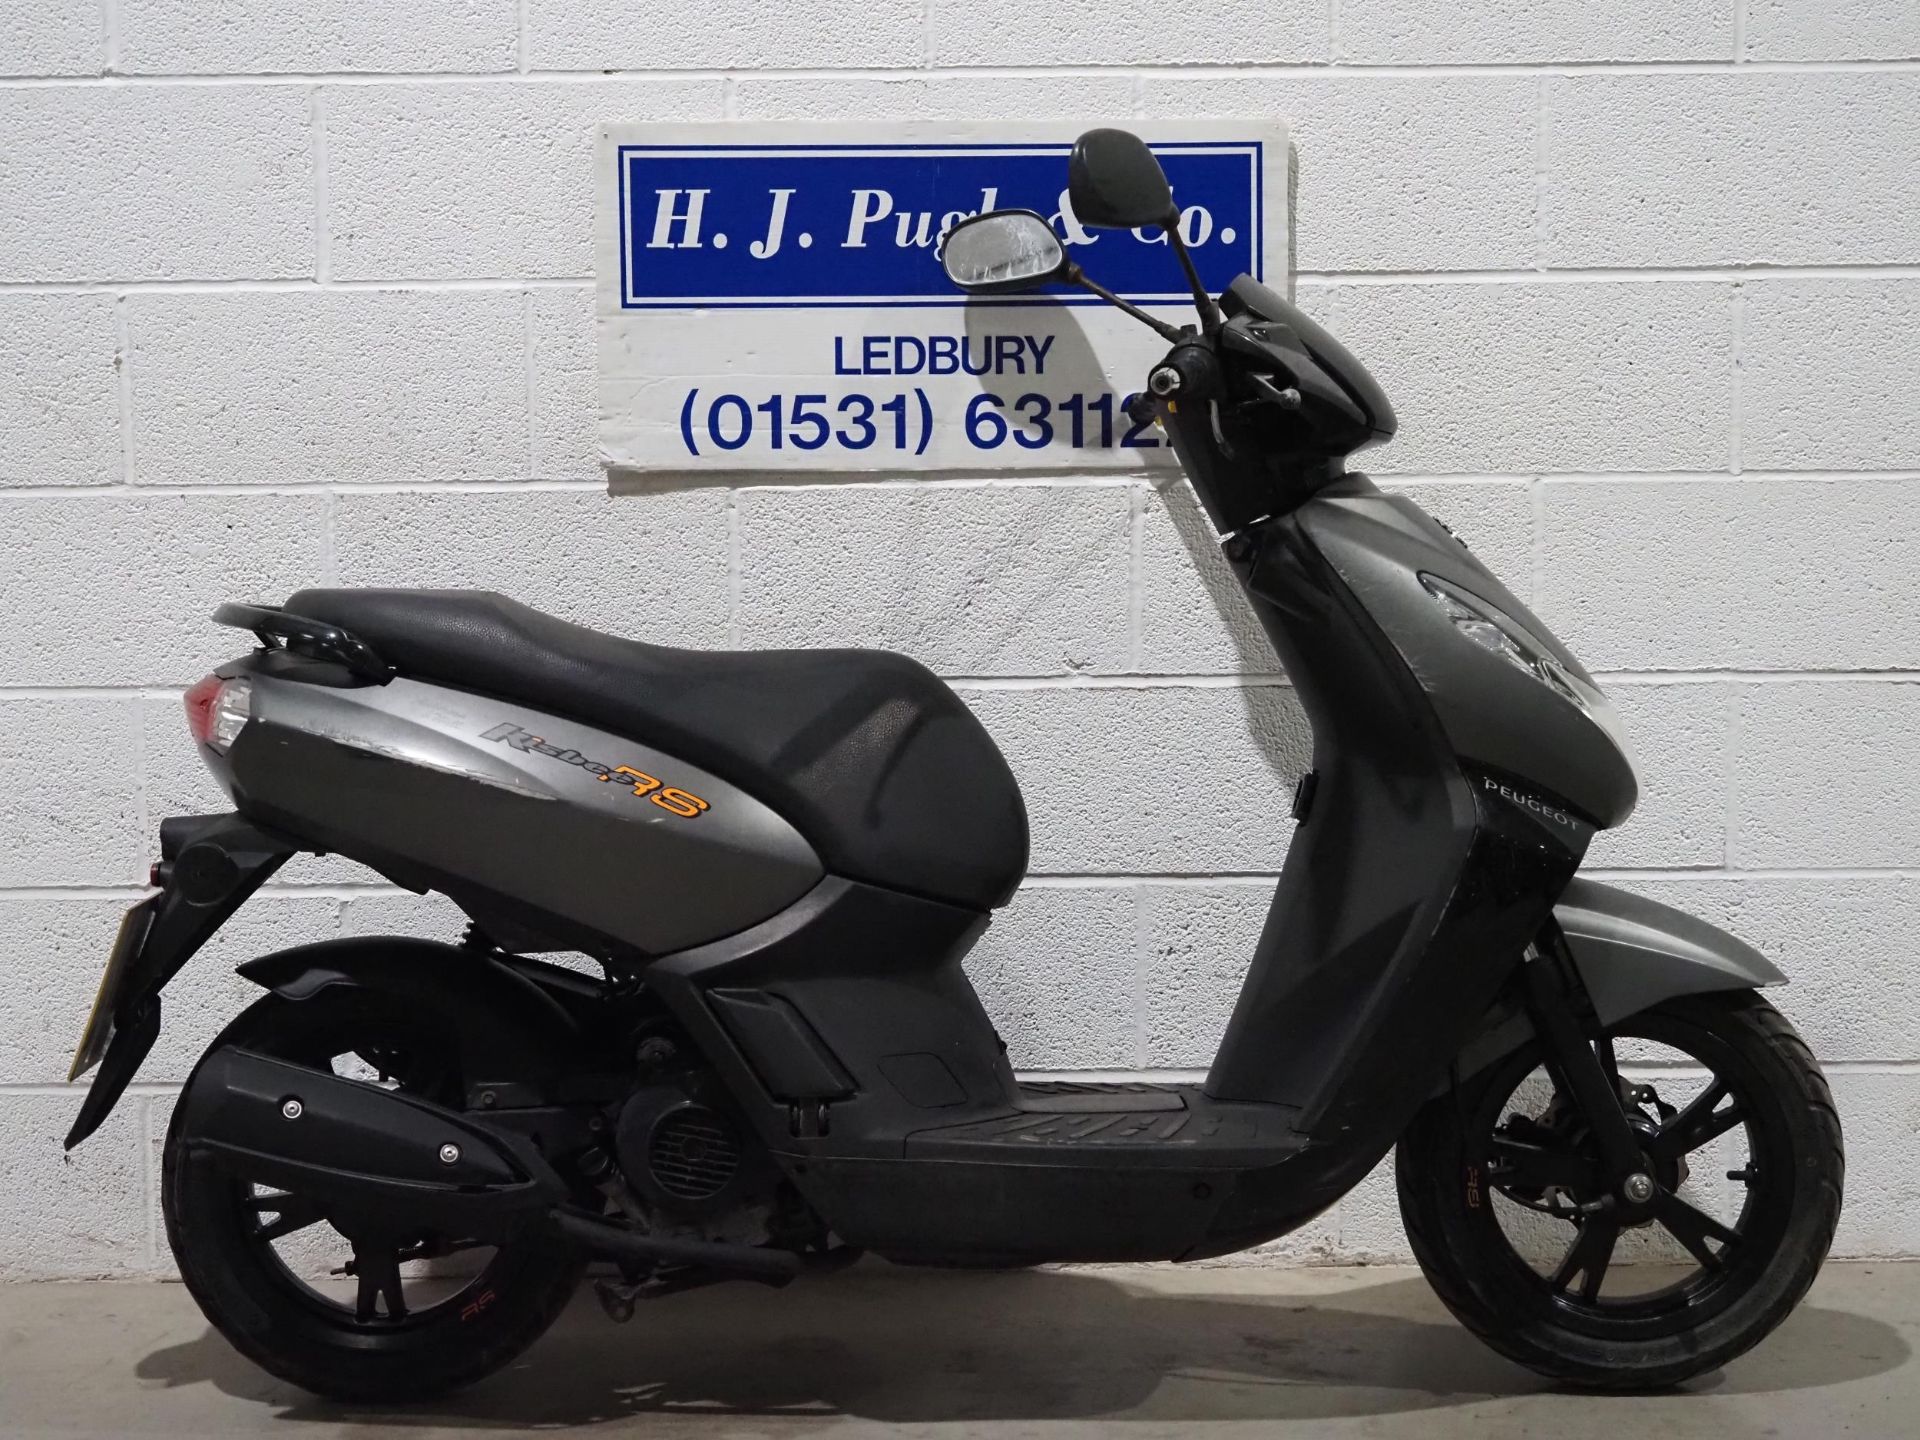 Peugeot Kisbee 50 moped. 2015. 49cc. Last ran in February. HPI clear and comes with MOT test